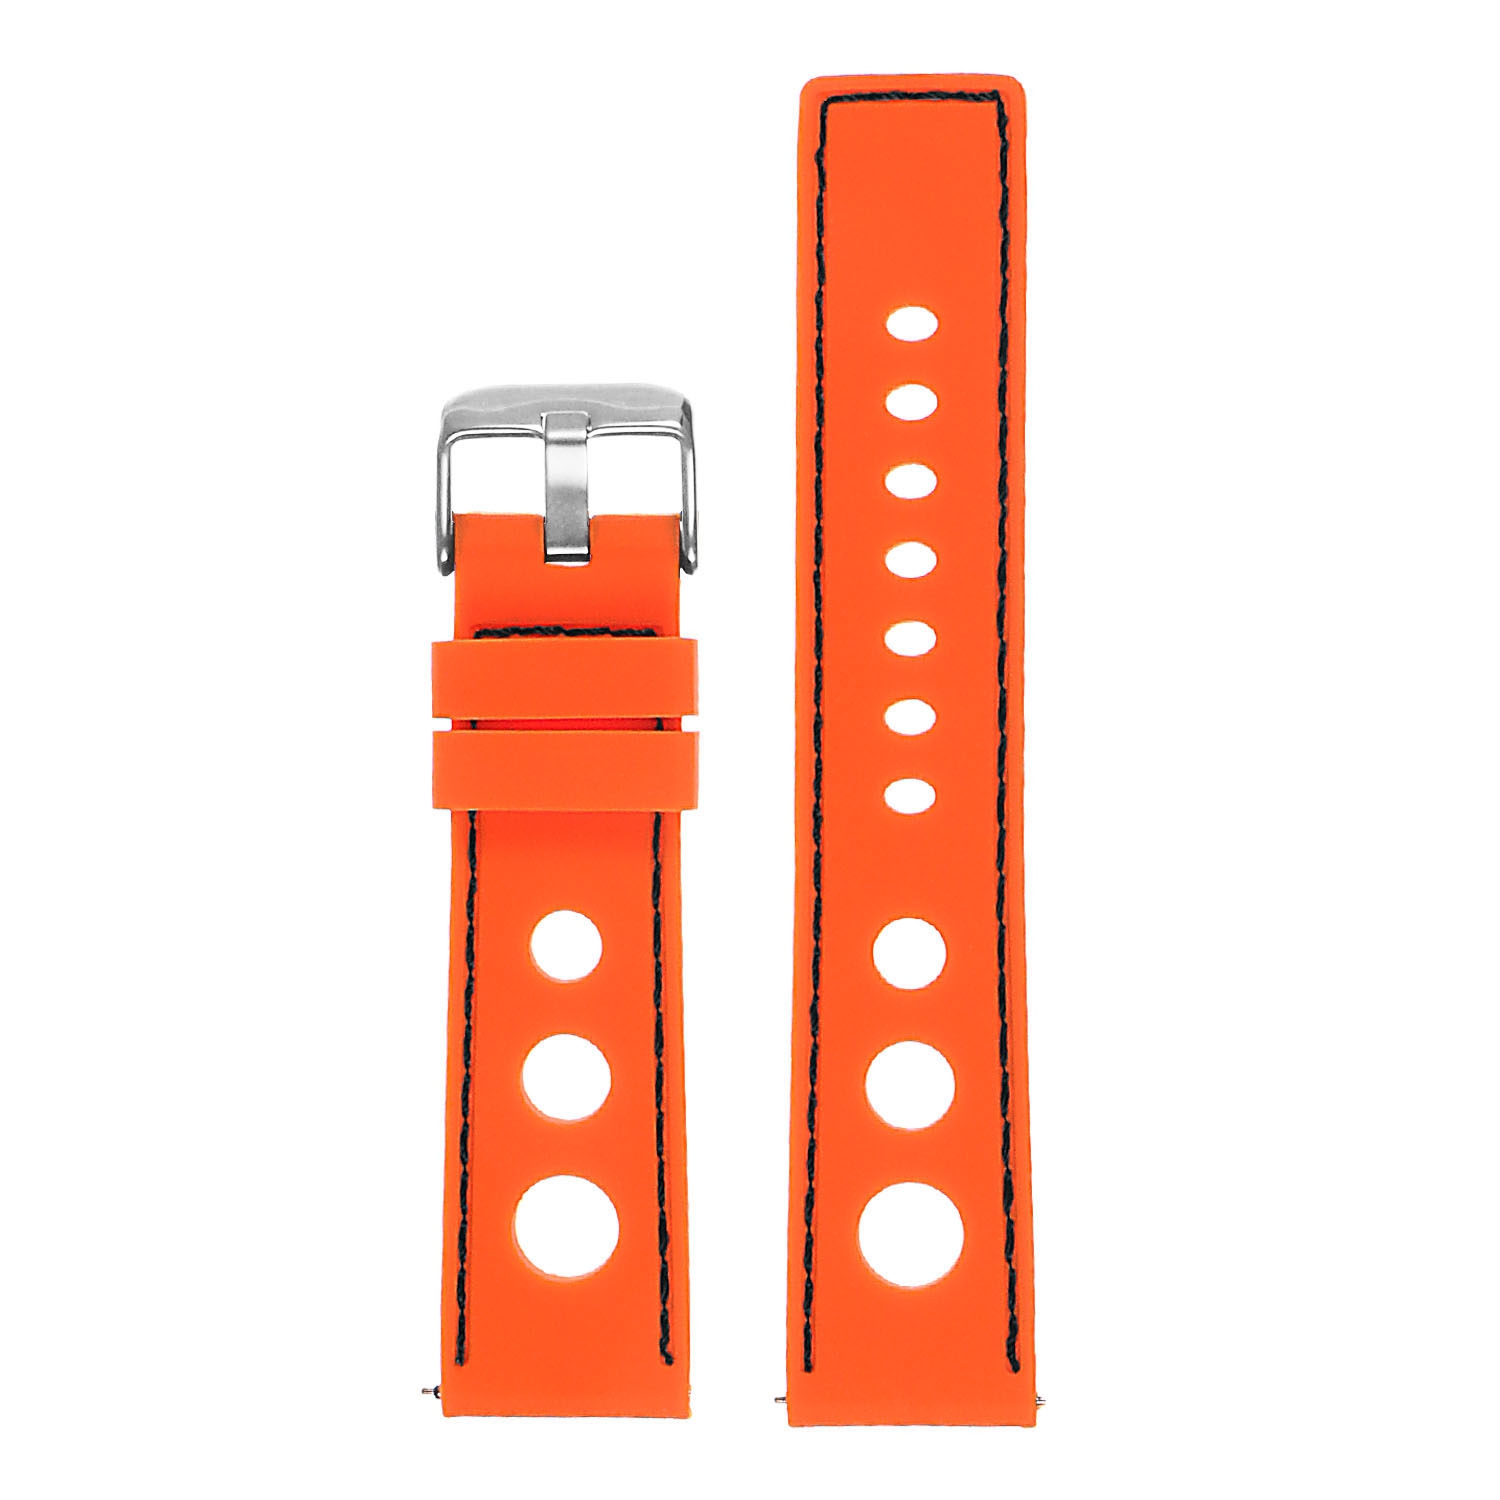 StrapsCo Silicone Rubber Rally Watch Band Strap for Fossil Sport Smartwatch - 22mm - Orange & Black